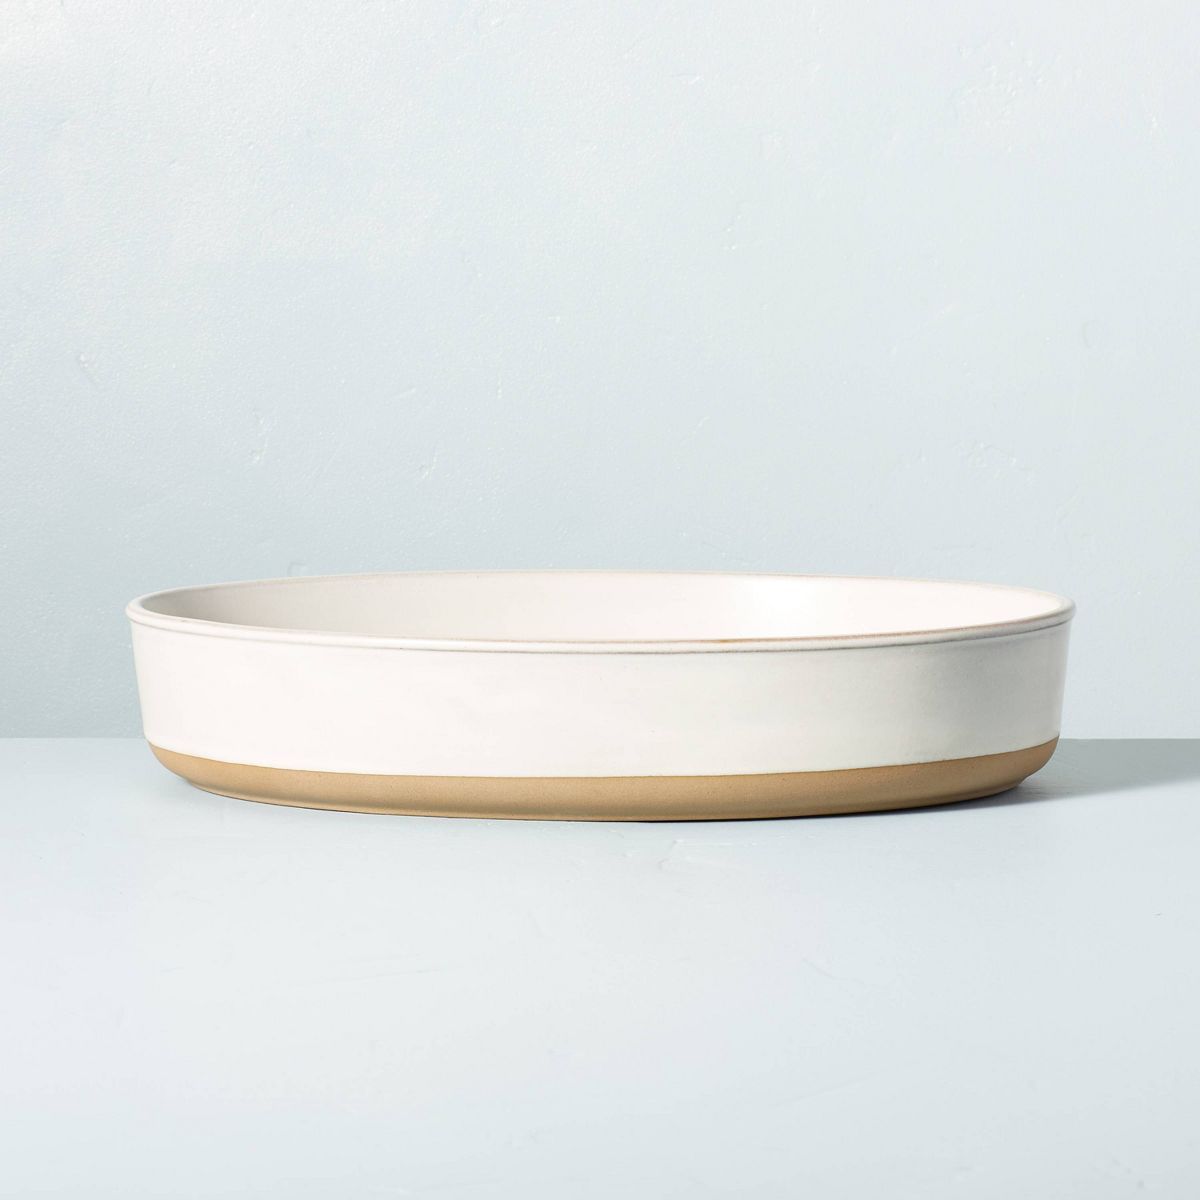 95oz Modern Rim Stoneware Oval Serving Bowl Cream/Clay - Hearth & Hand™ with Magnolia | Target